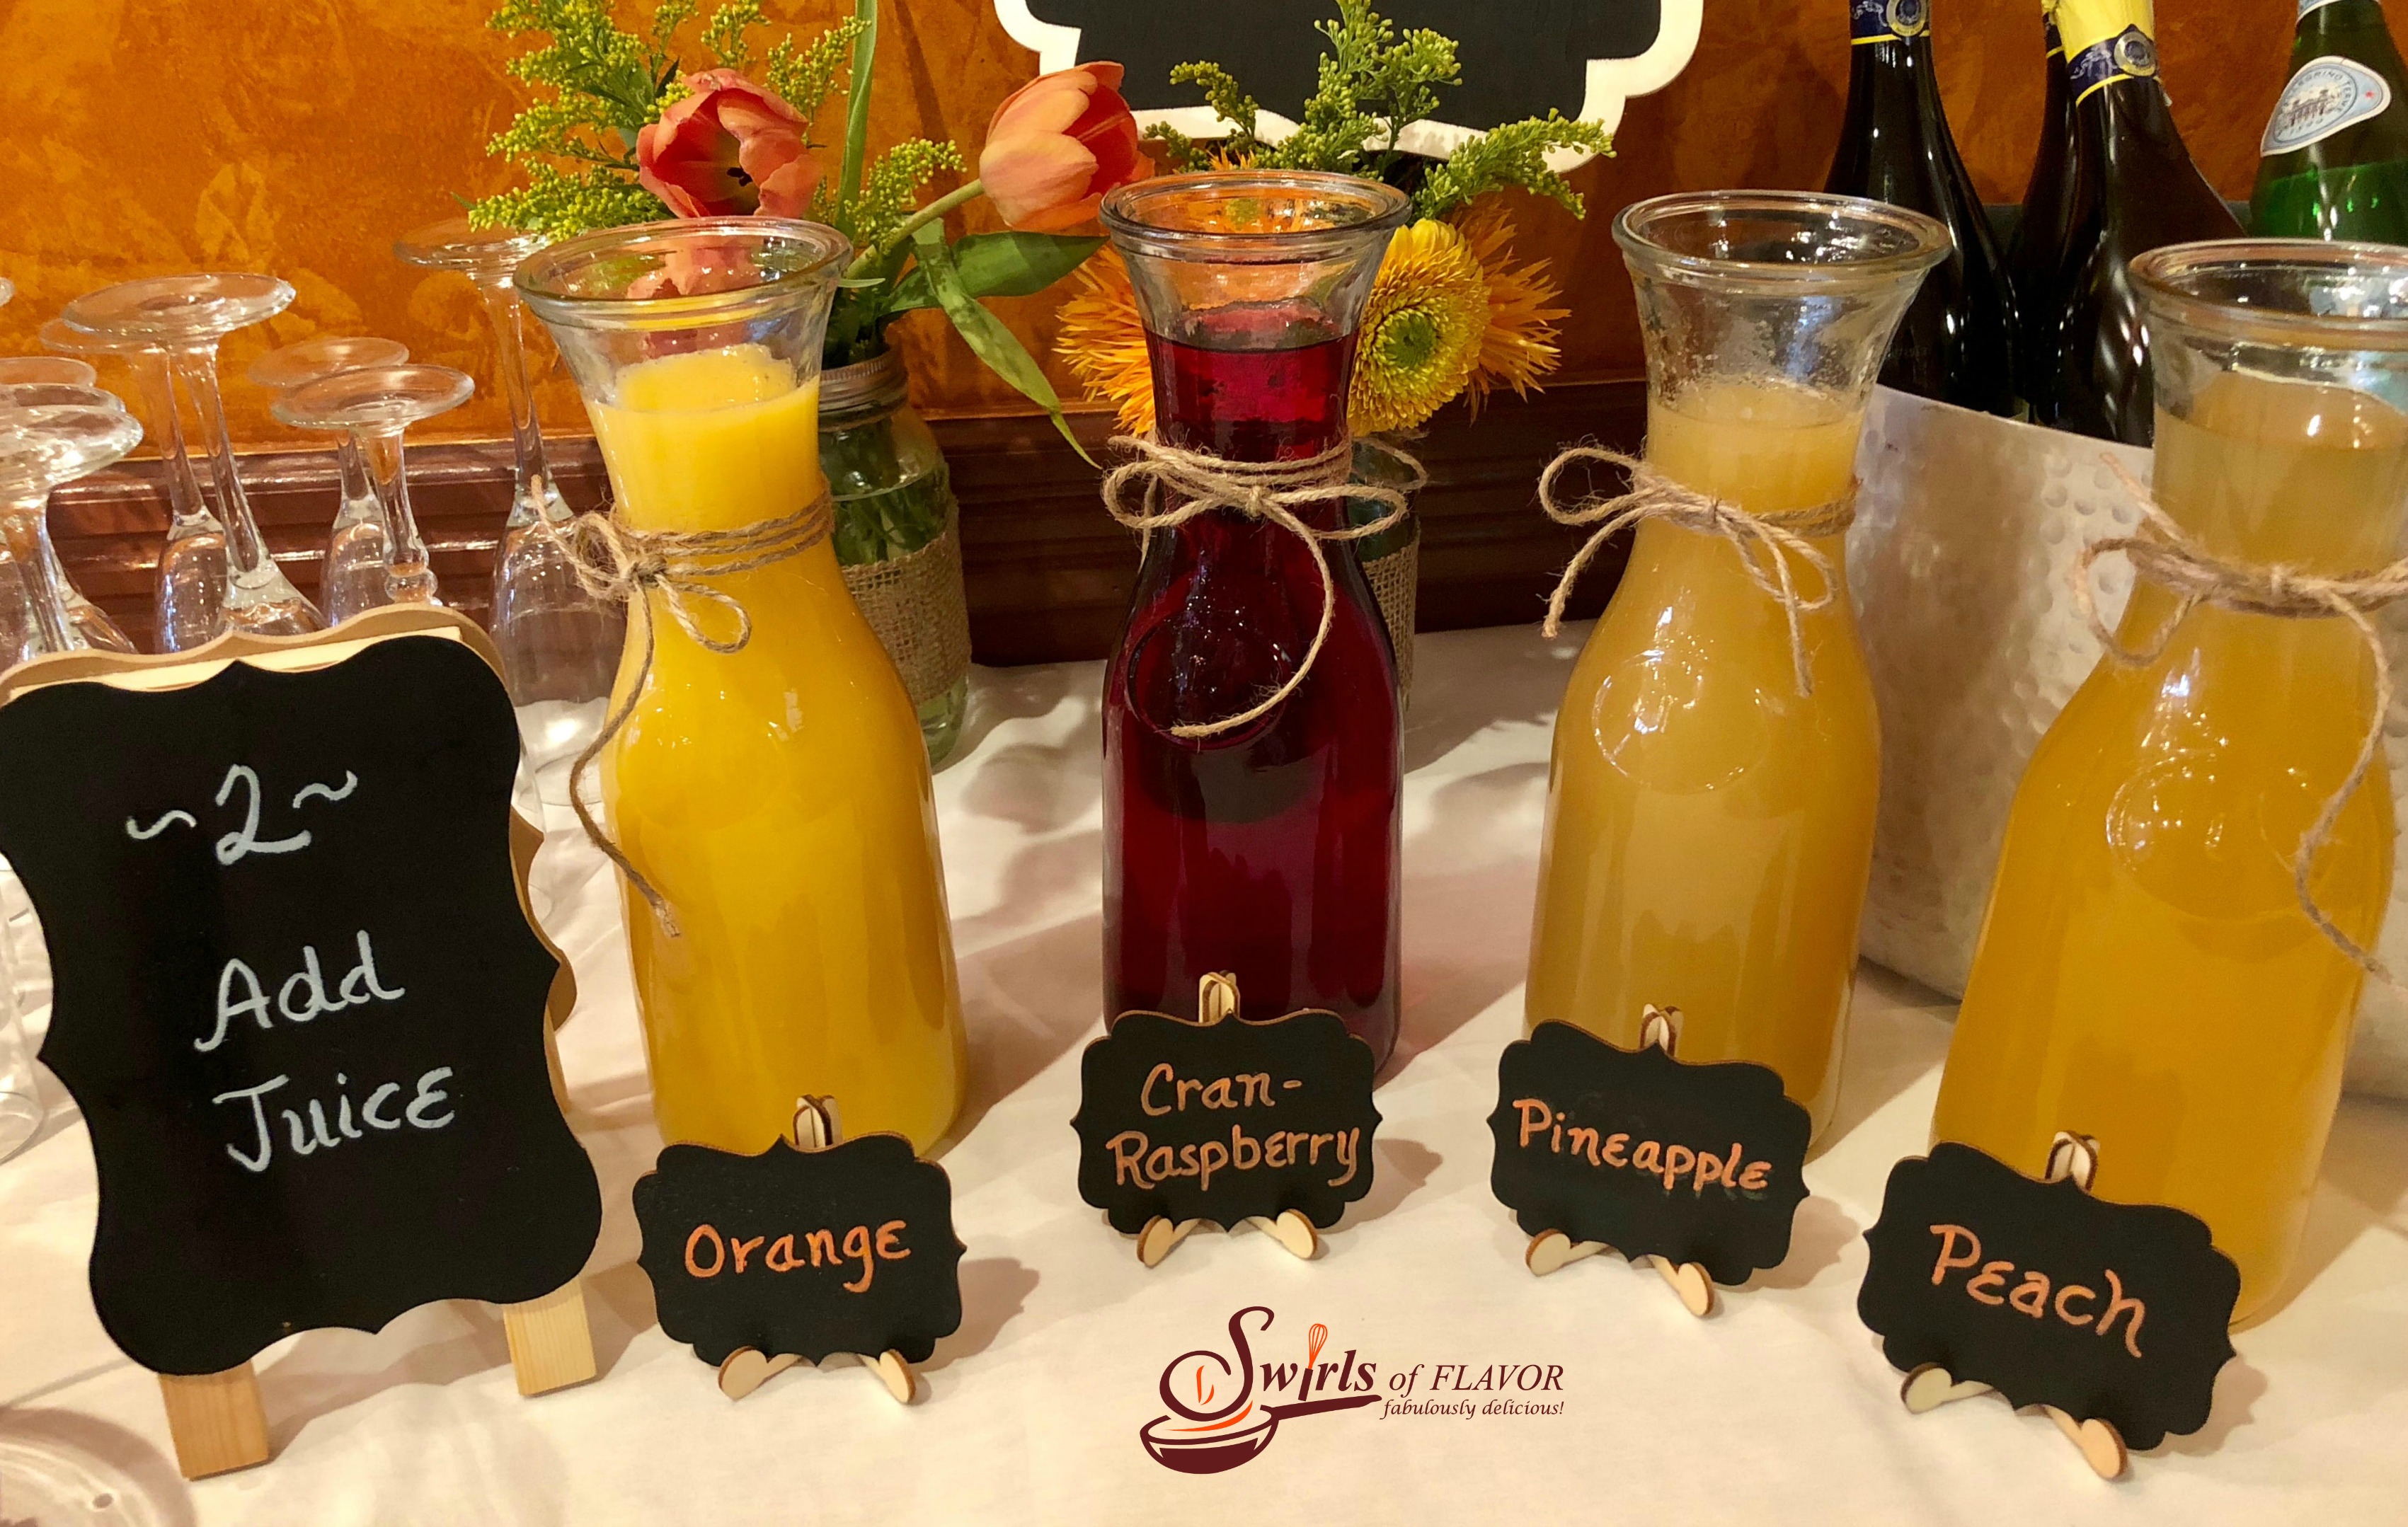 Juices in carafes with Add Juice chalkboard sign